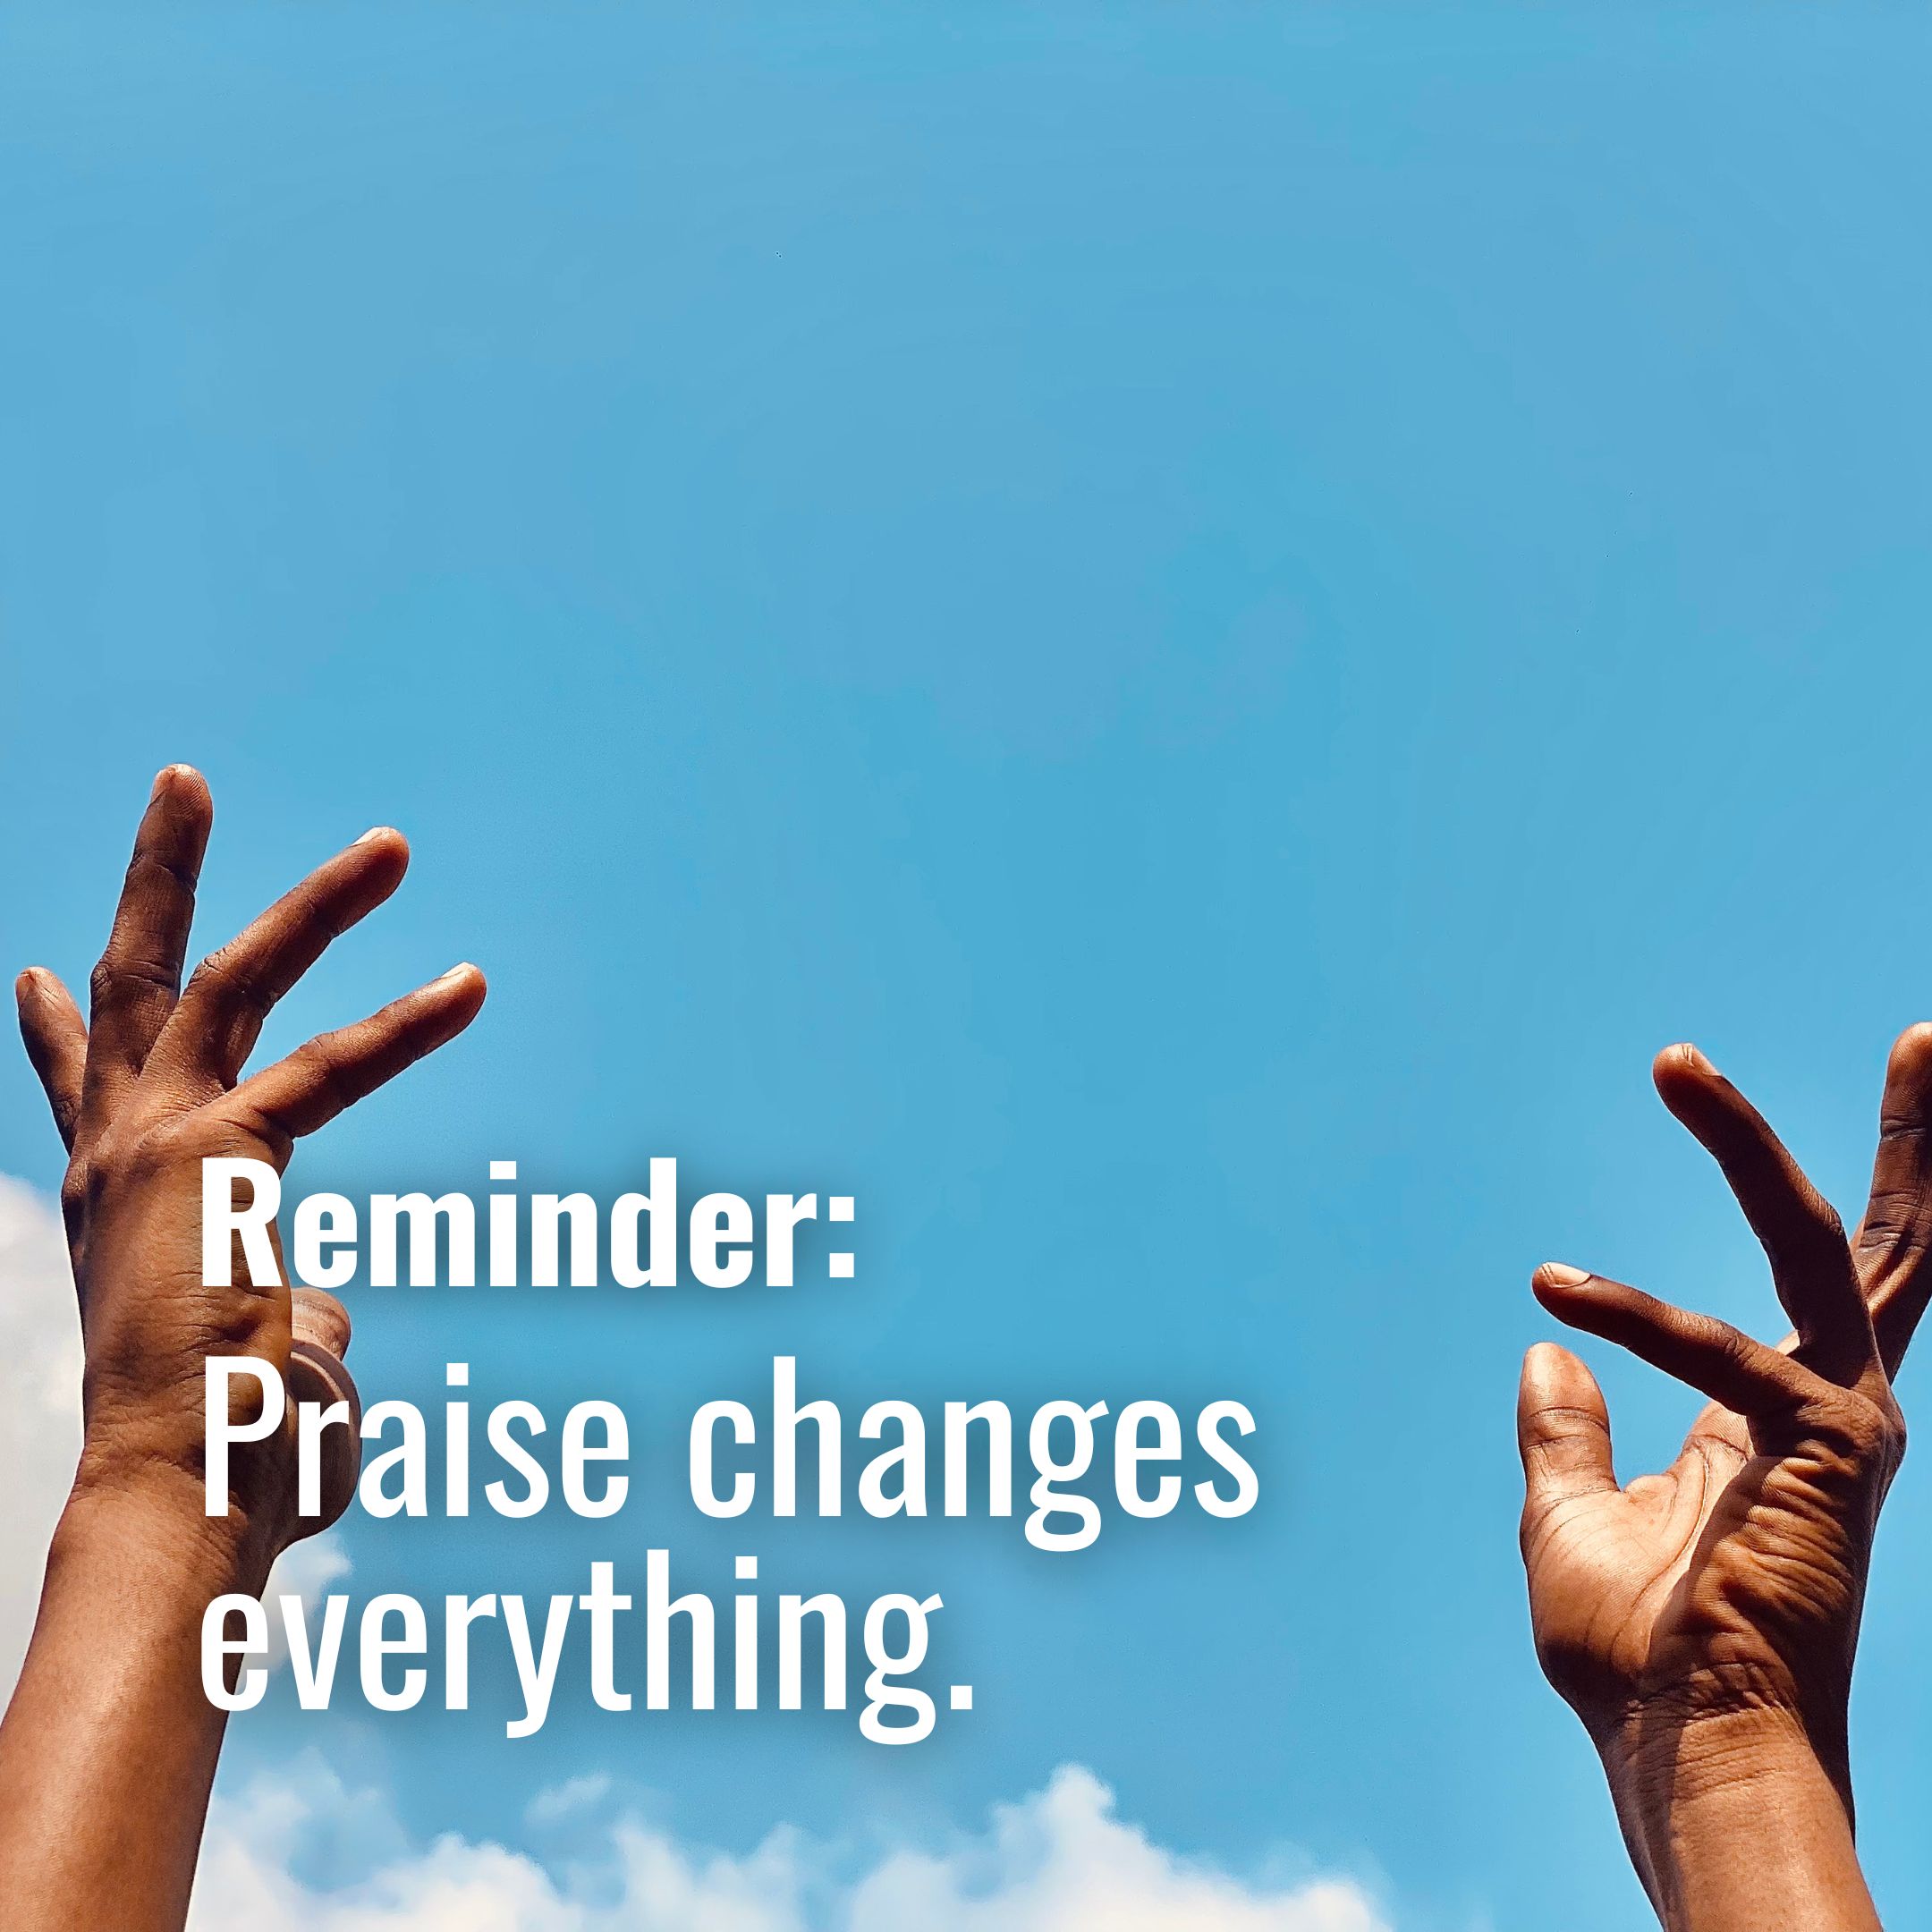 Praise changes everything.